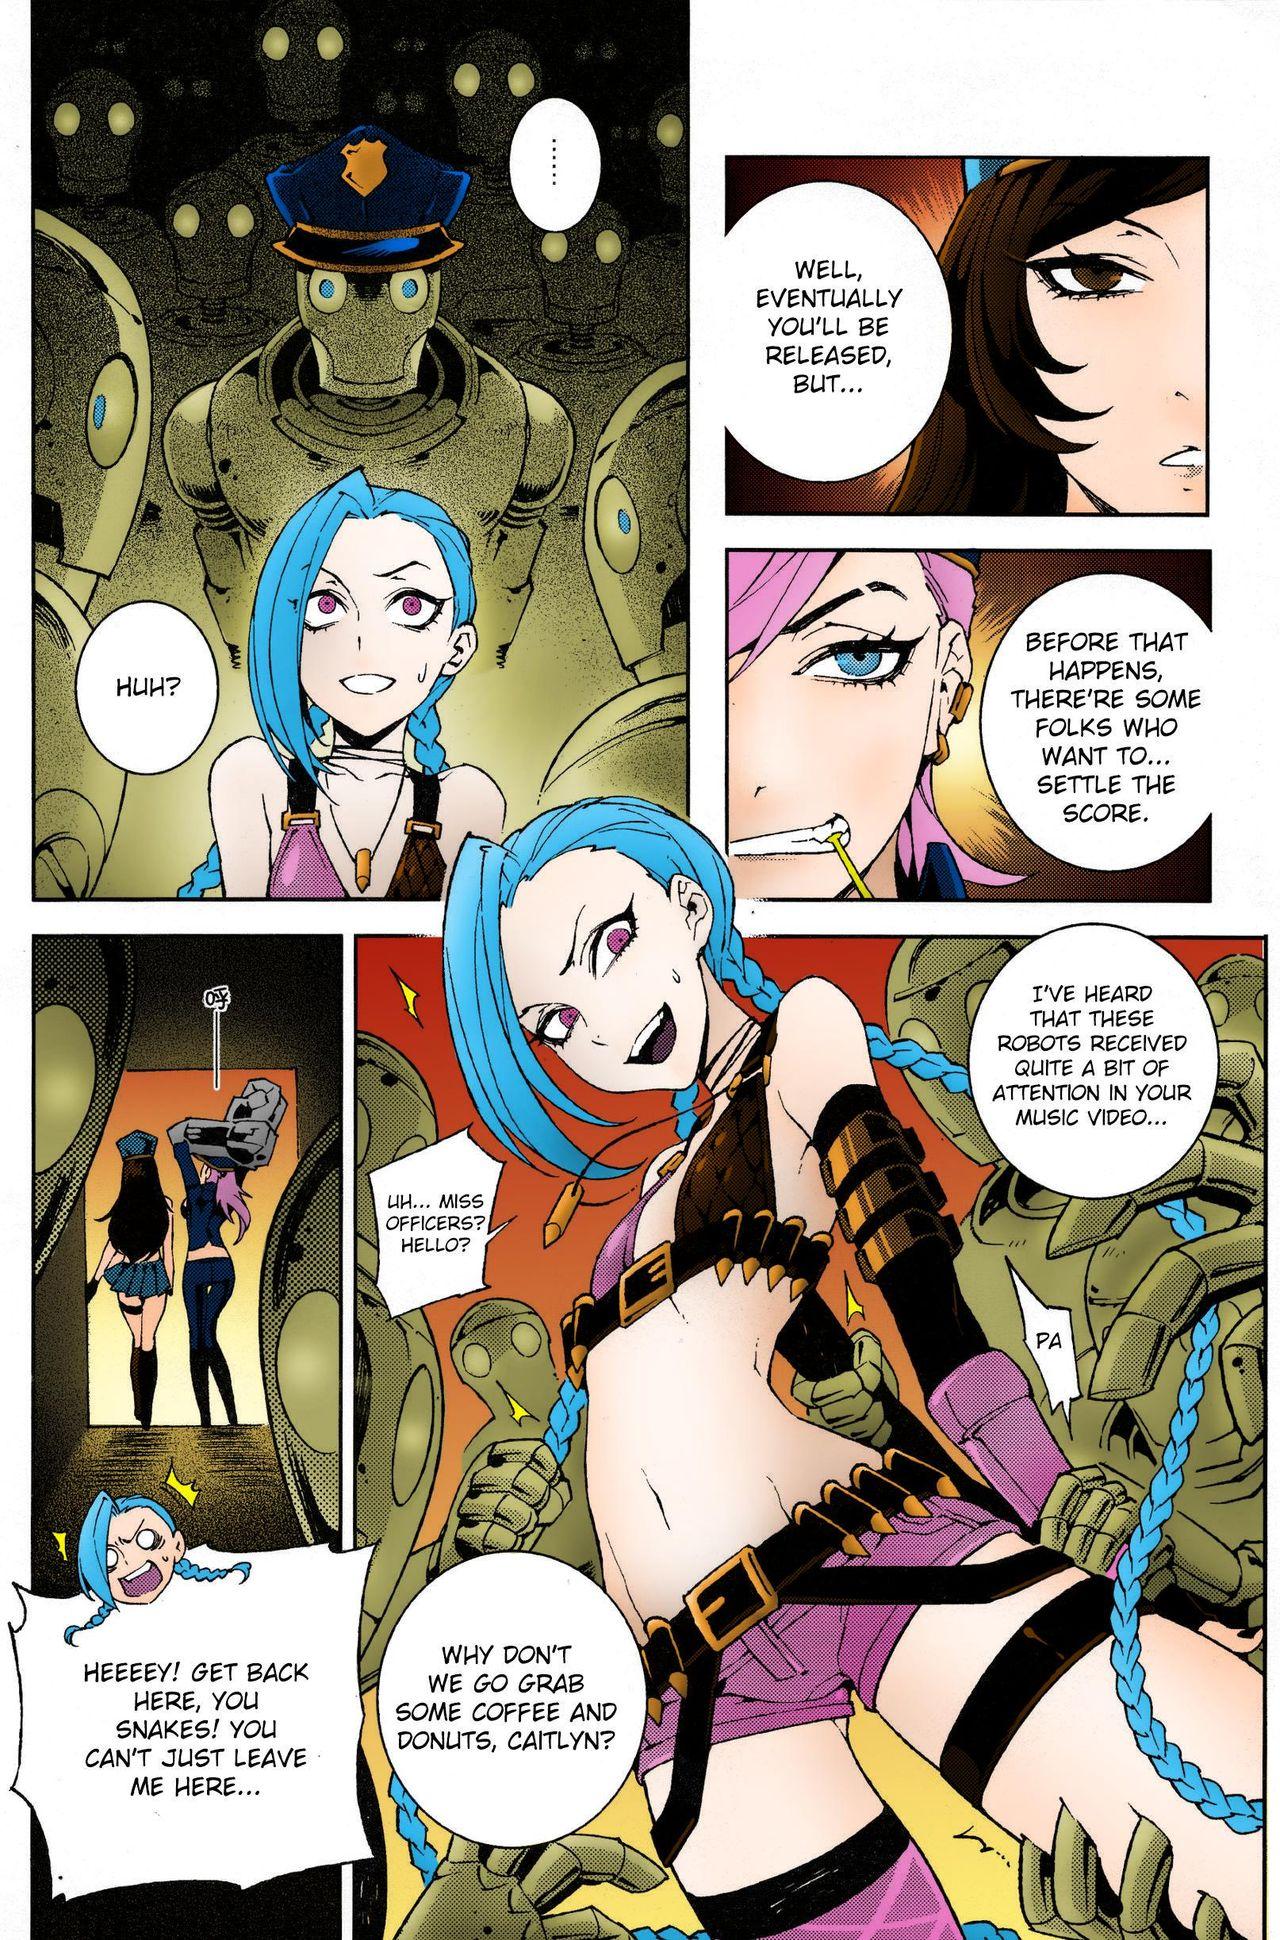 Grosso JINX Come On! Shoot Faster - League of legends Gloryholes - Page 3